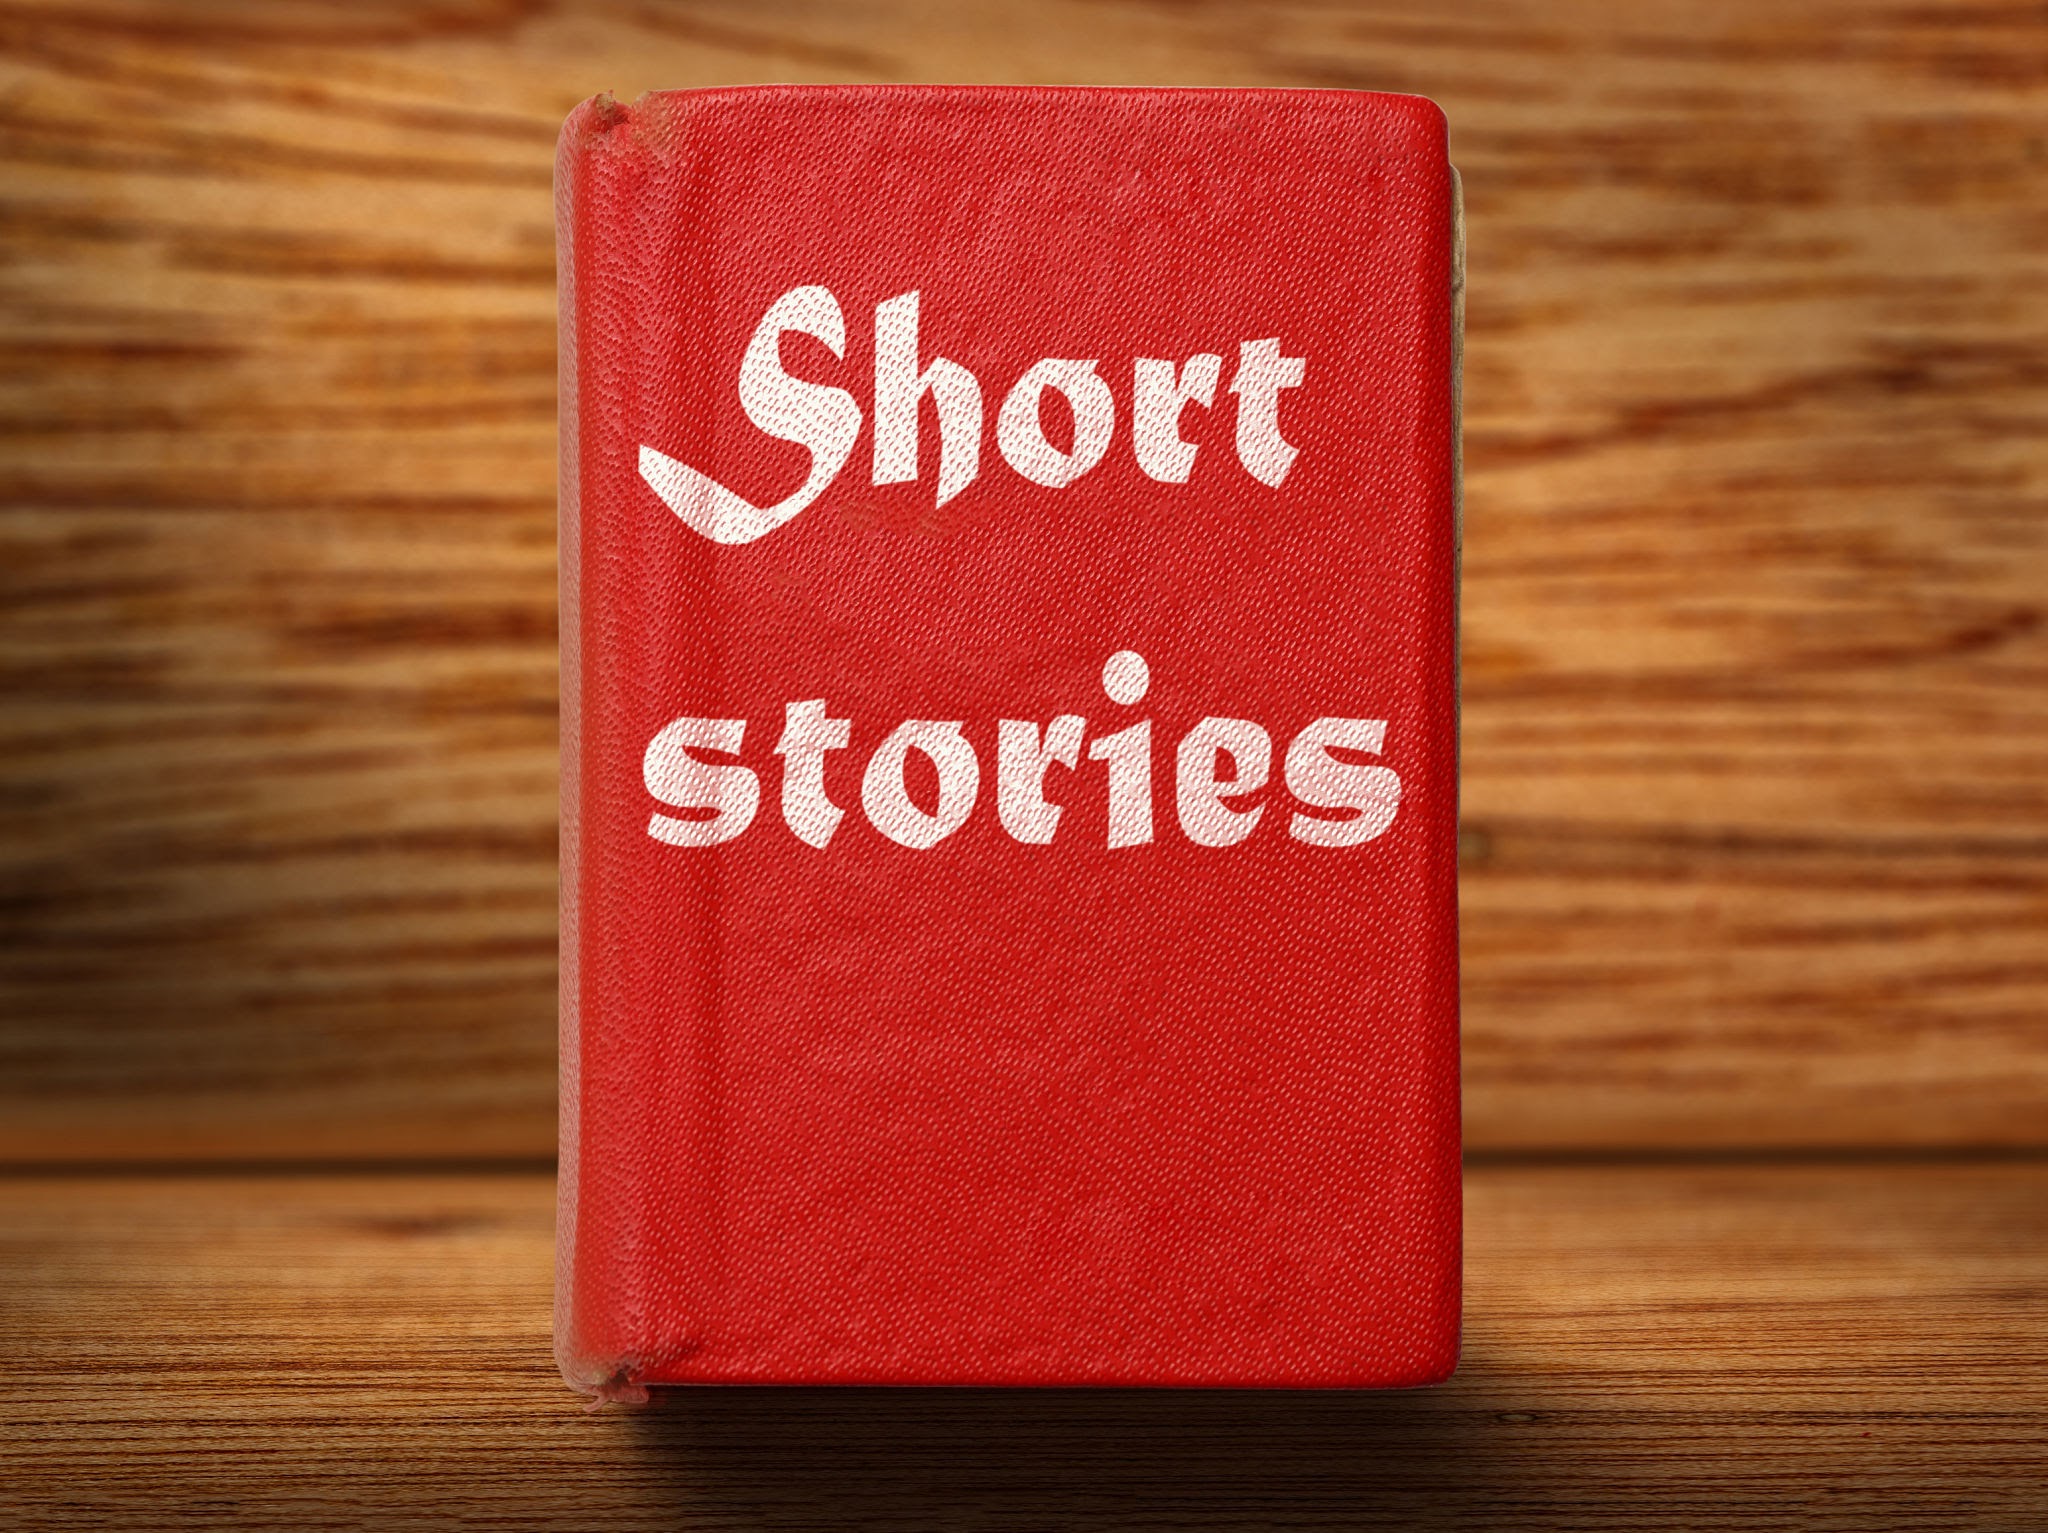 Short stories book. Story картинки. S-short. Short story картинка.